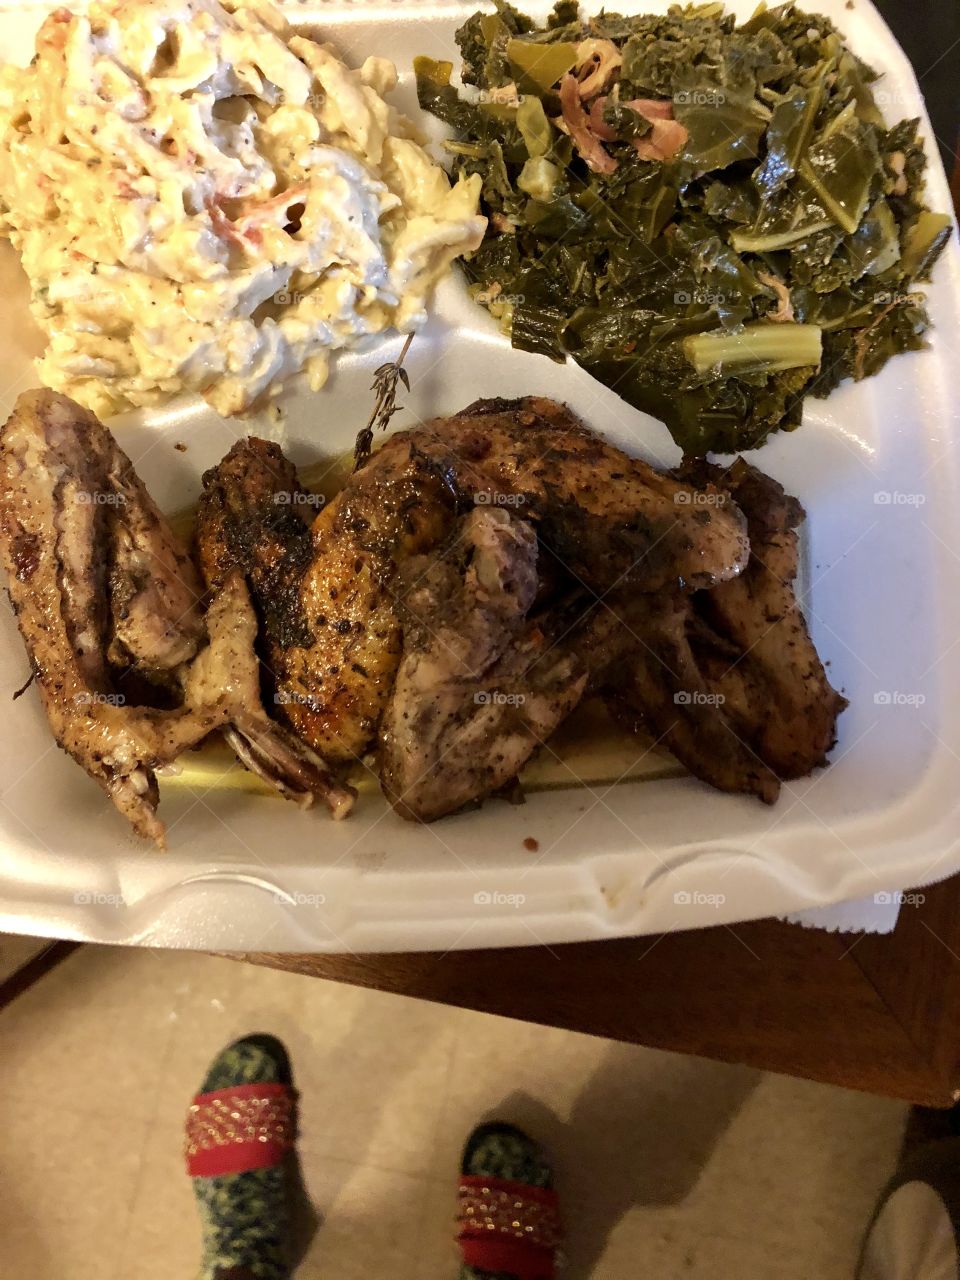 Hot meal for a winter day . Jerk wings, salad and greens...Mina 1017